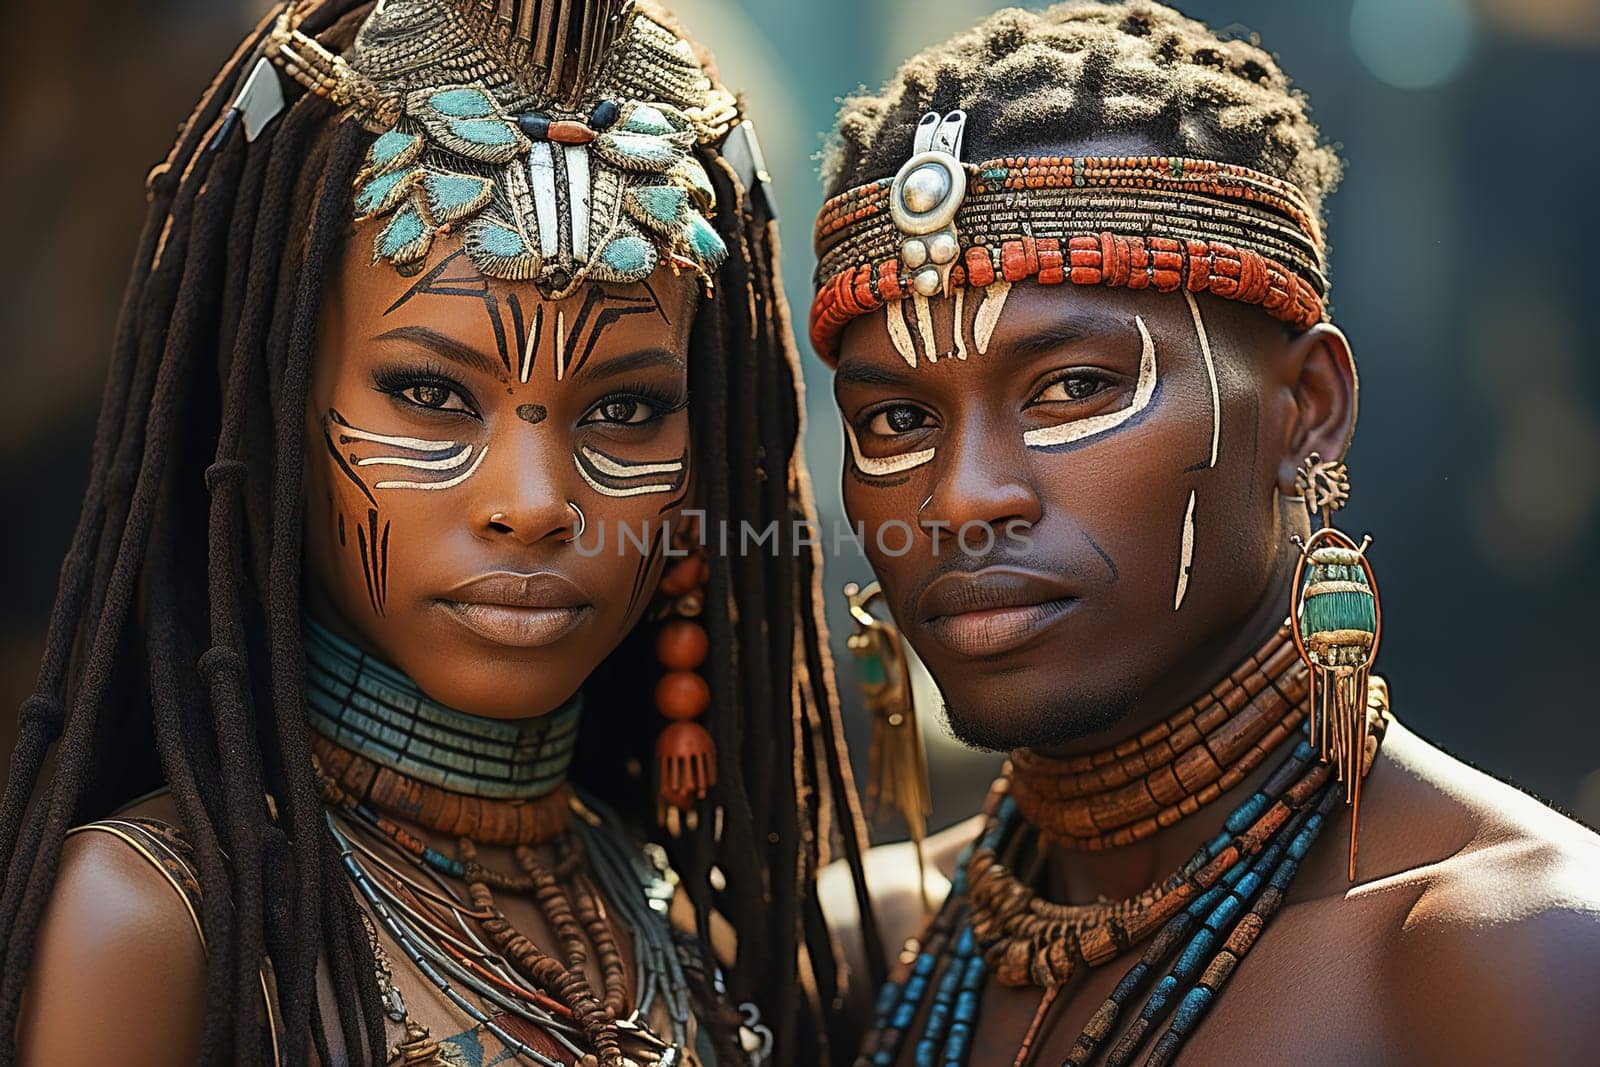 Portrait of an African man and woman with traditionally painted faces and jewelry from an African tribe